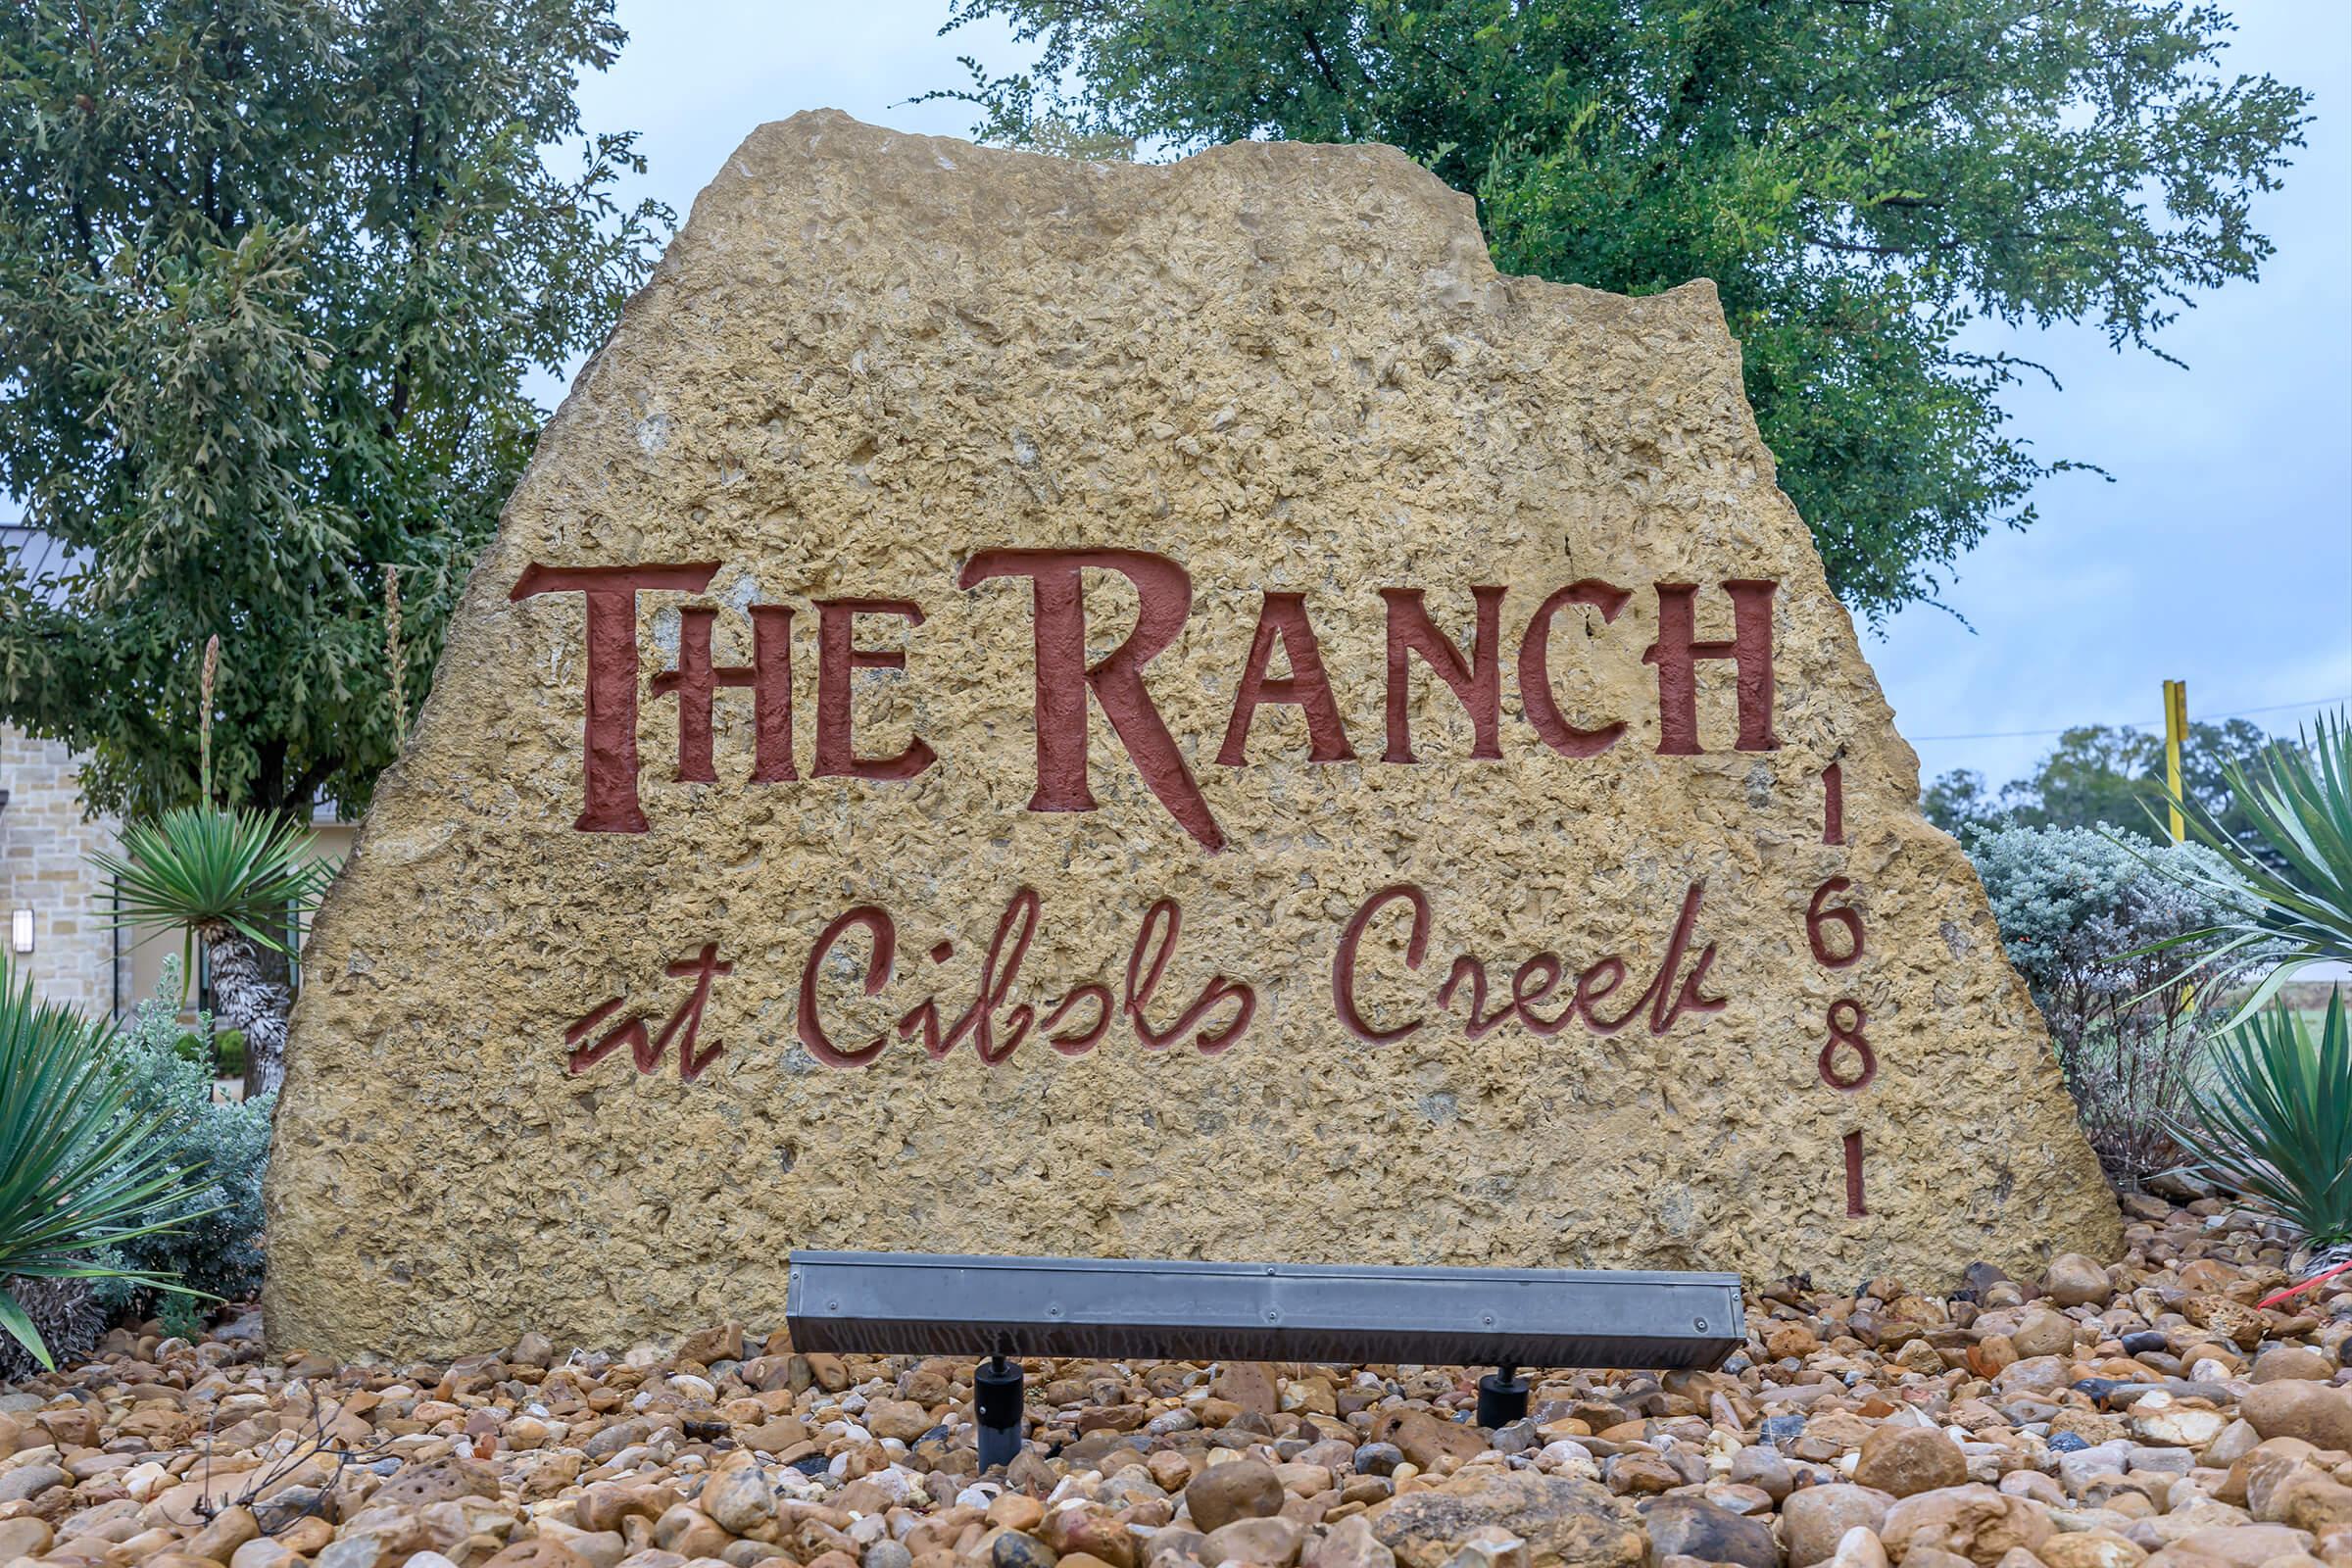 a sign in front of a large rock